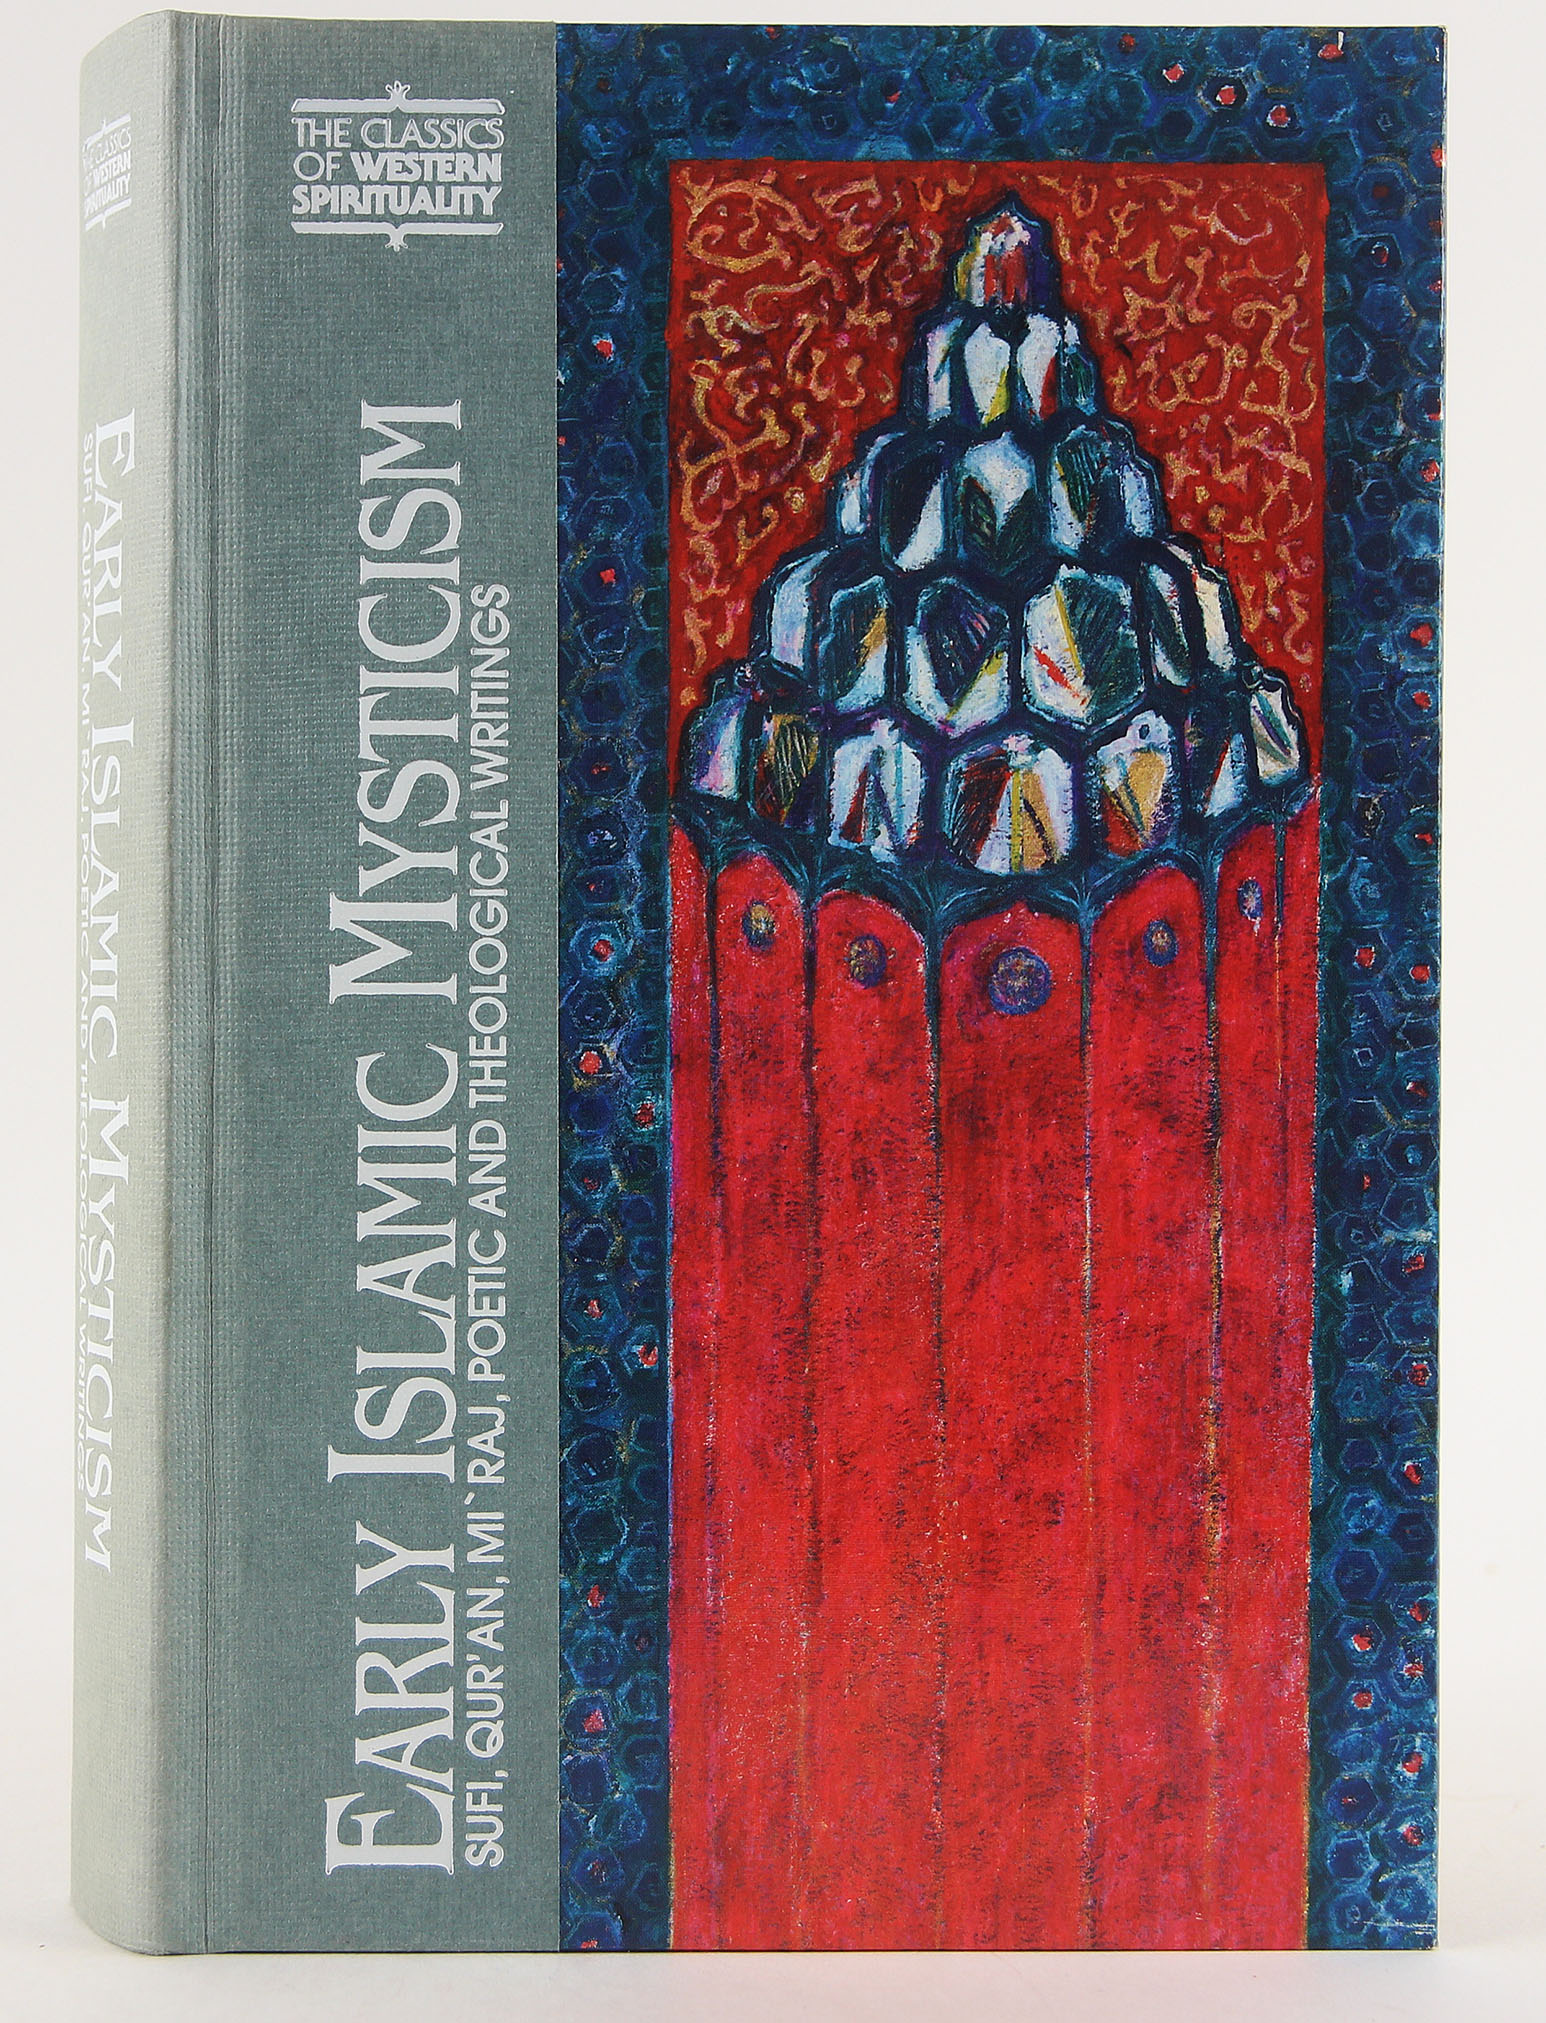 Early Islamic Mysticism: Sufi, Quran, Miraj, Poetic and Theological Writings (CLASSICS OF WESTERN SPIRITUALITY) - Sells, Michael Anthony [Editor]